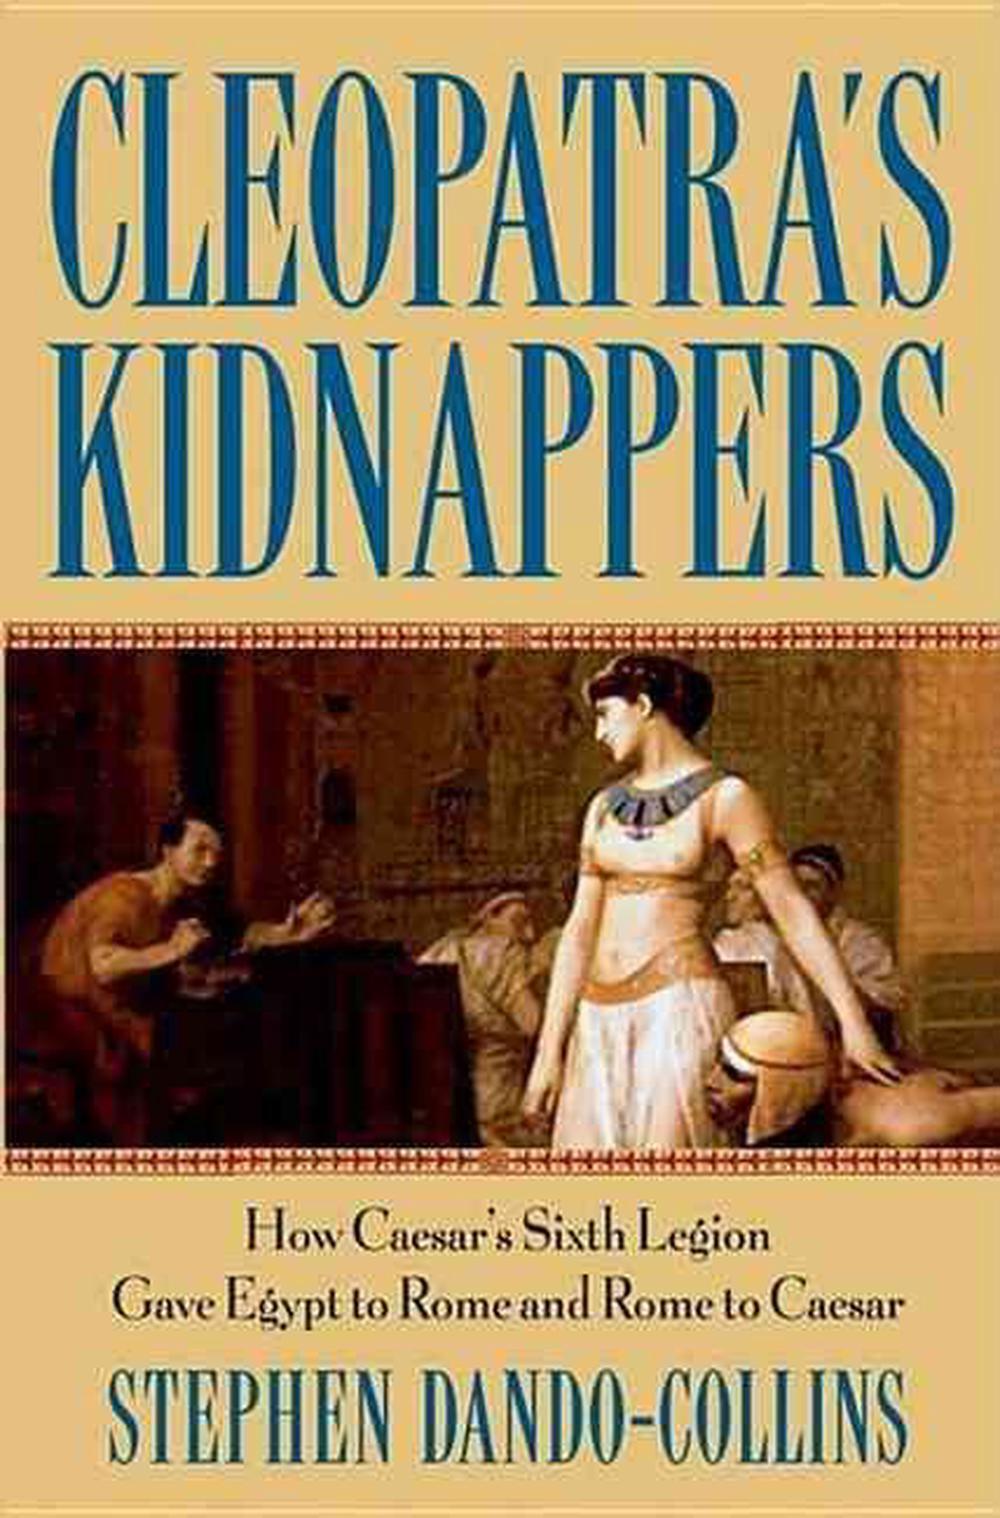 Cleopatra's Kidnappers: How Caesar's Sixth Legion Gave Egypt to Rome and Rome to